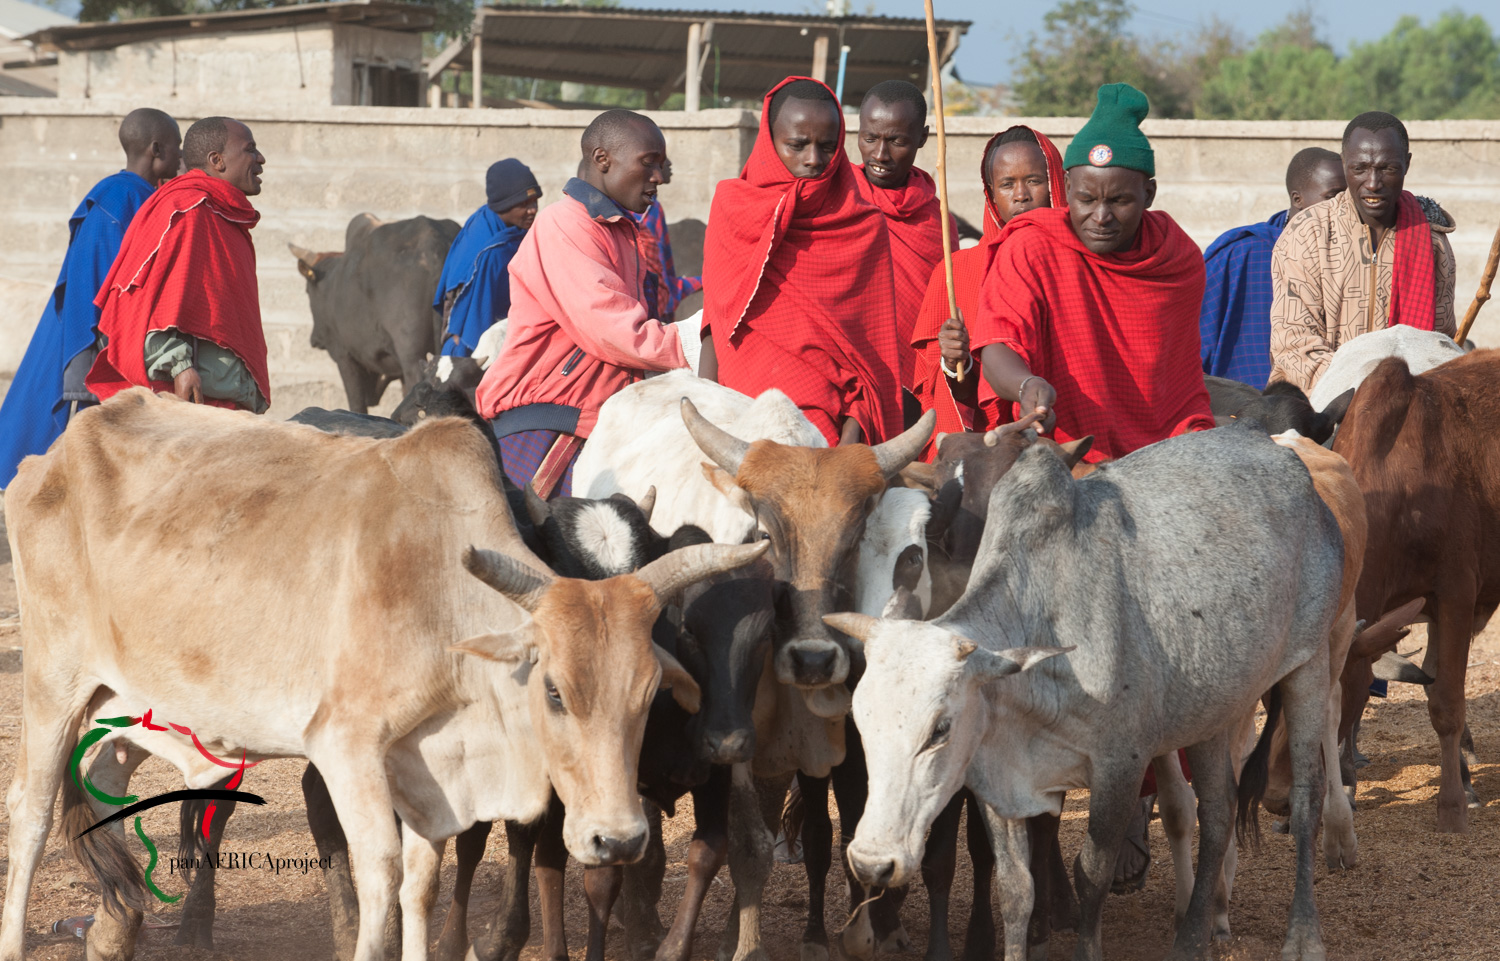 People from the Maasai tribe with cattle